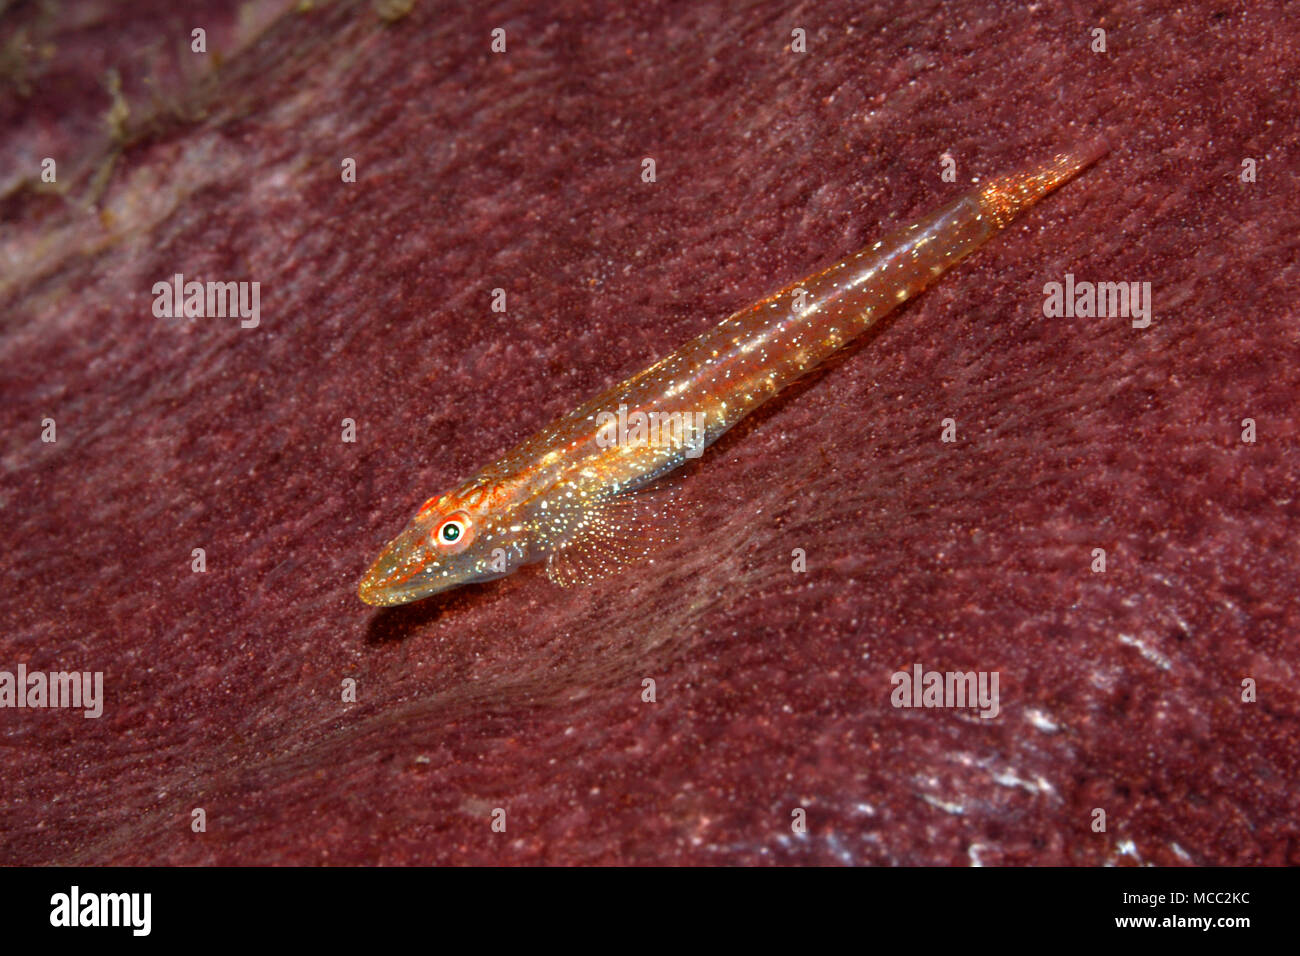 Slender Spongegoby, Phyllogobius platycephalops. Also known as Flathead Goby. This species is  commensal on sponges of the genus Phyllospongia. Stock Photo